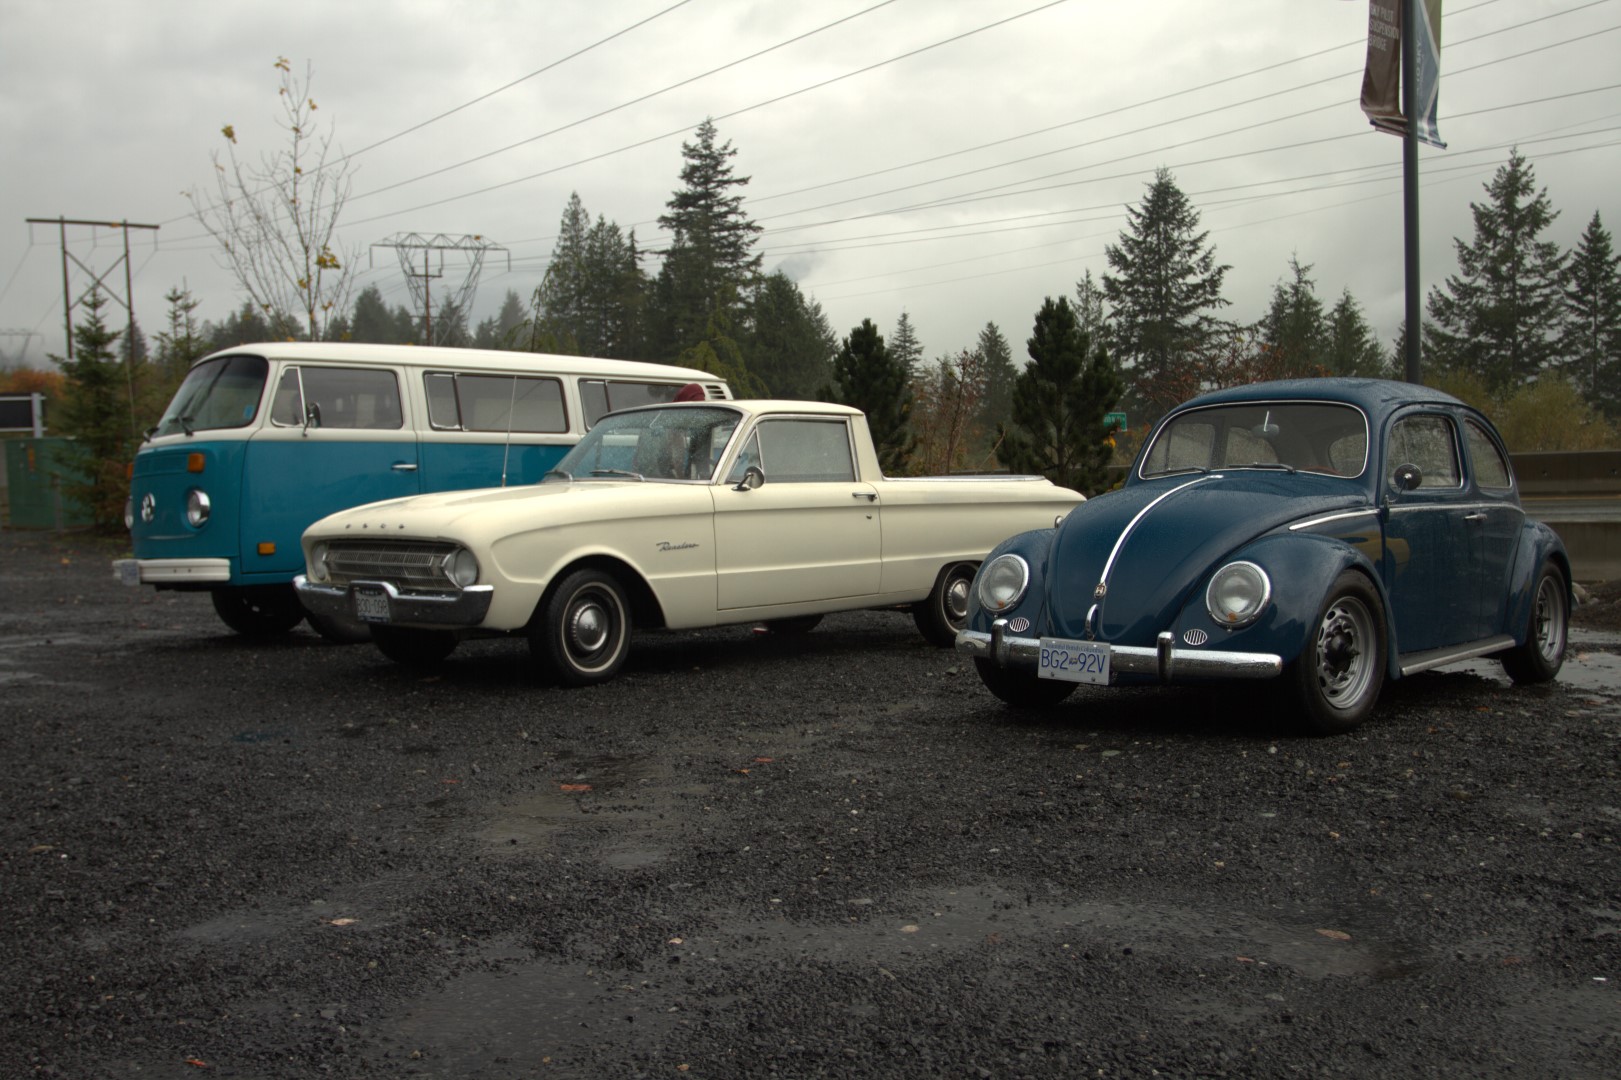 Nice Beatle, one of 2 there, nice first gen Falcon and another nice bus.